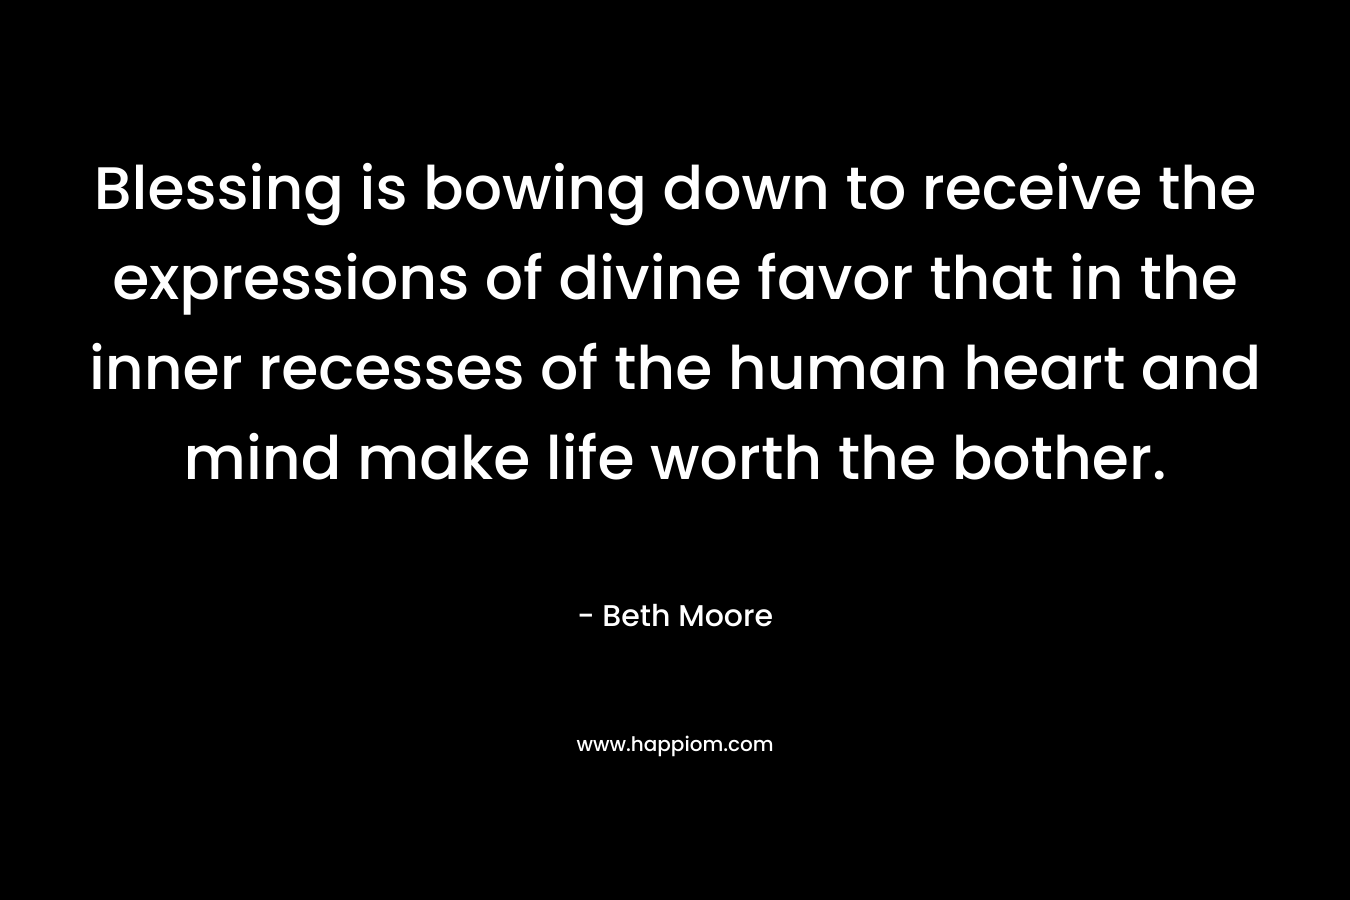 Blessing is bowing down to receive the expressions of divine favor that in the inner recesses of the human heart and mind make life worth the bother. – Beth Moore